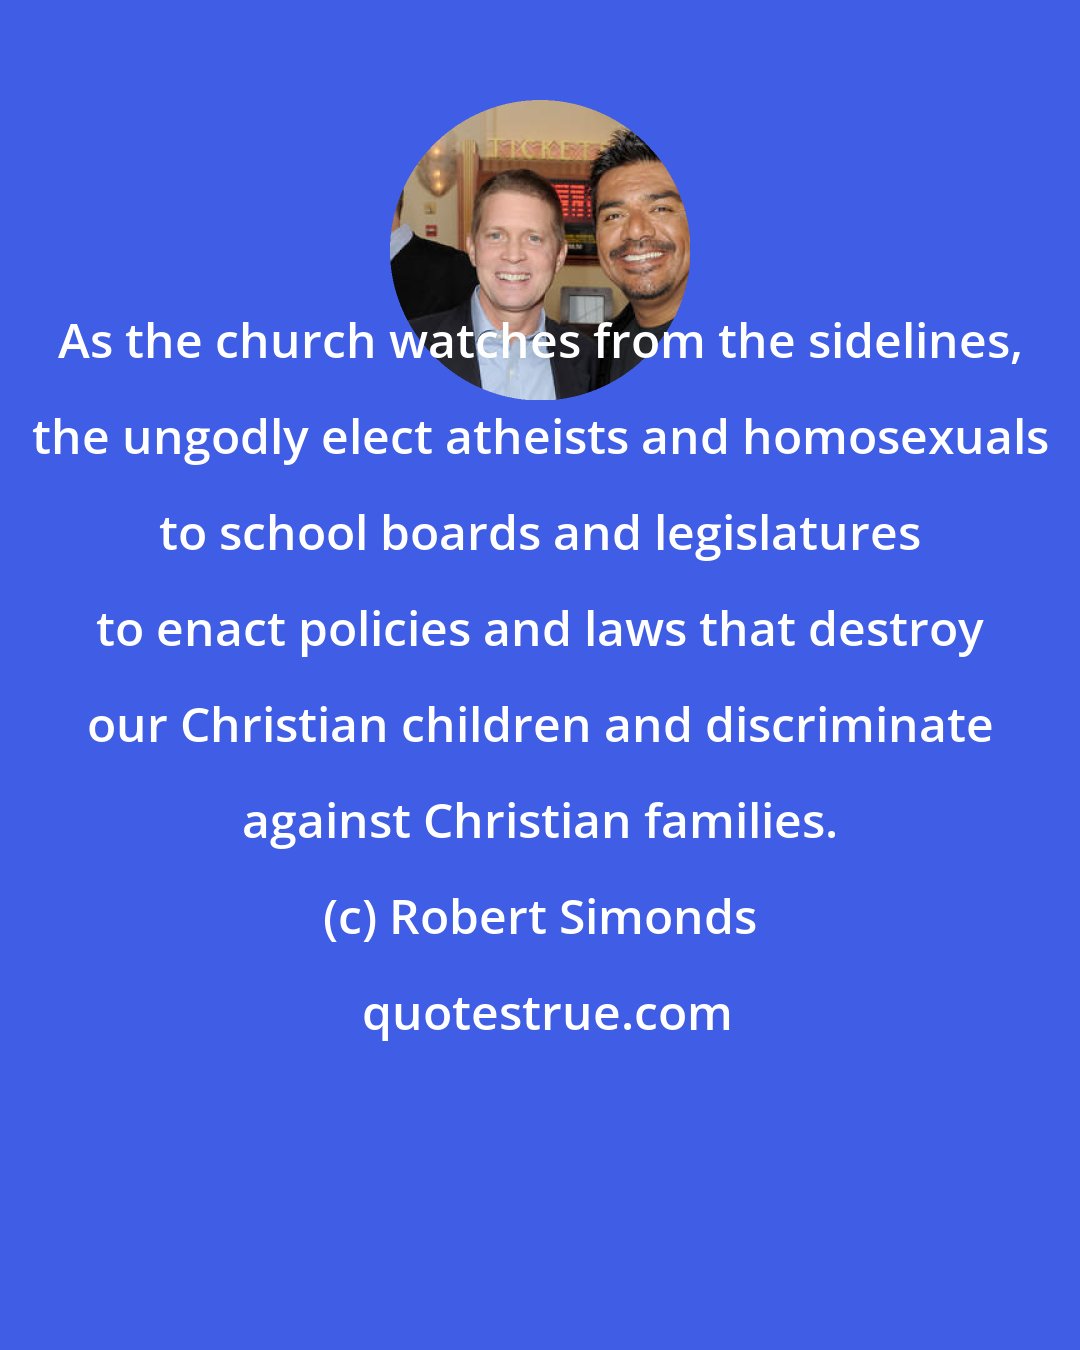 Robert Simonds: As the church watches from the sidelines, the ungodly elect atheists and homosexuals to school boards and legislatures to enact policies and laws that destroy our Christian children and discriminate against Christian families.